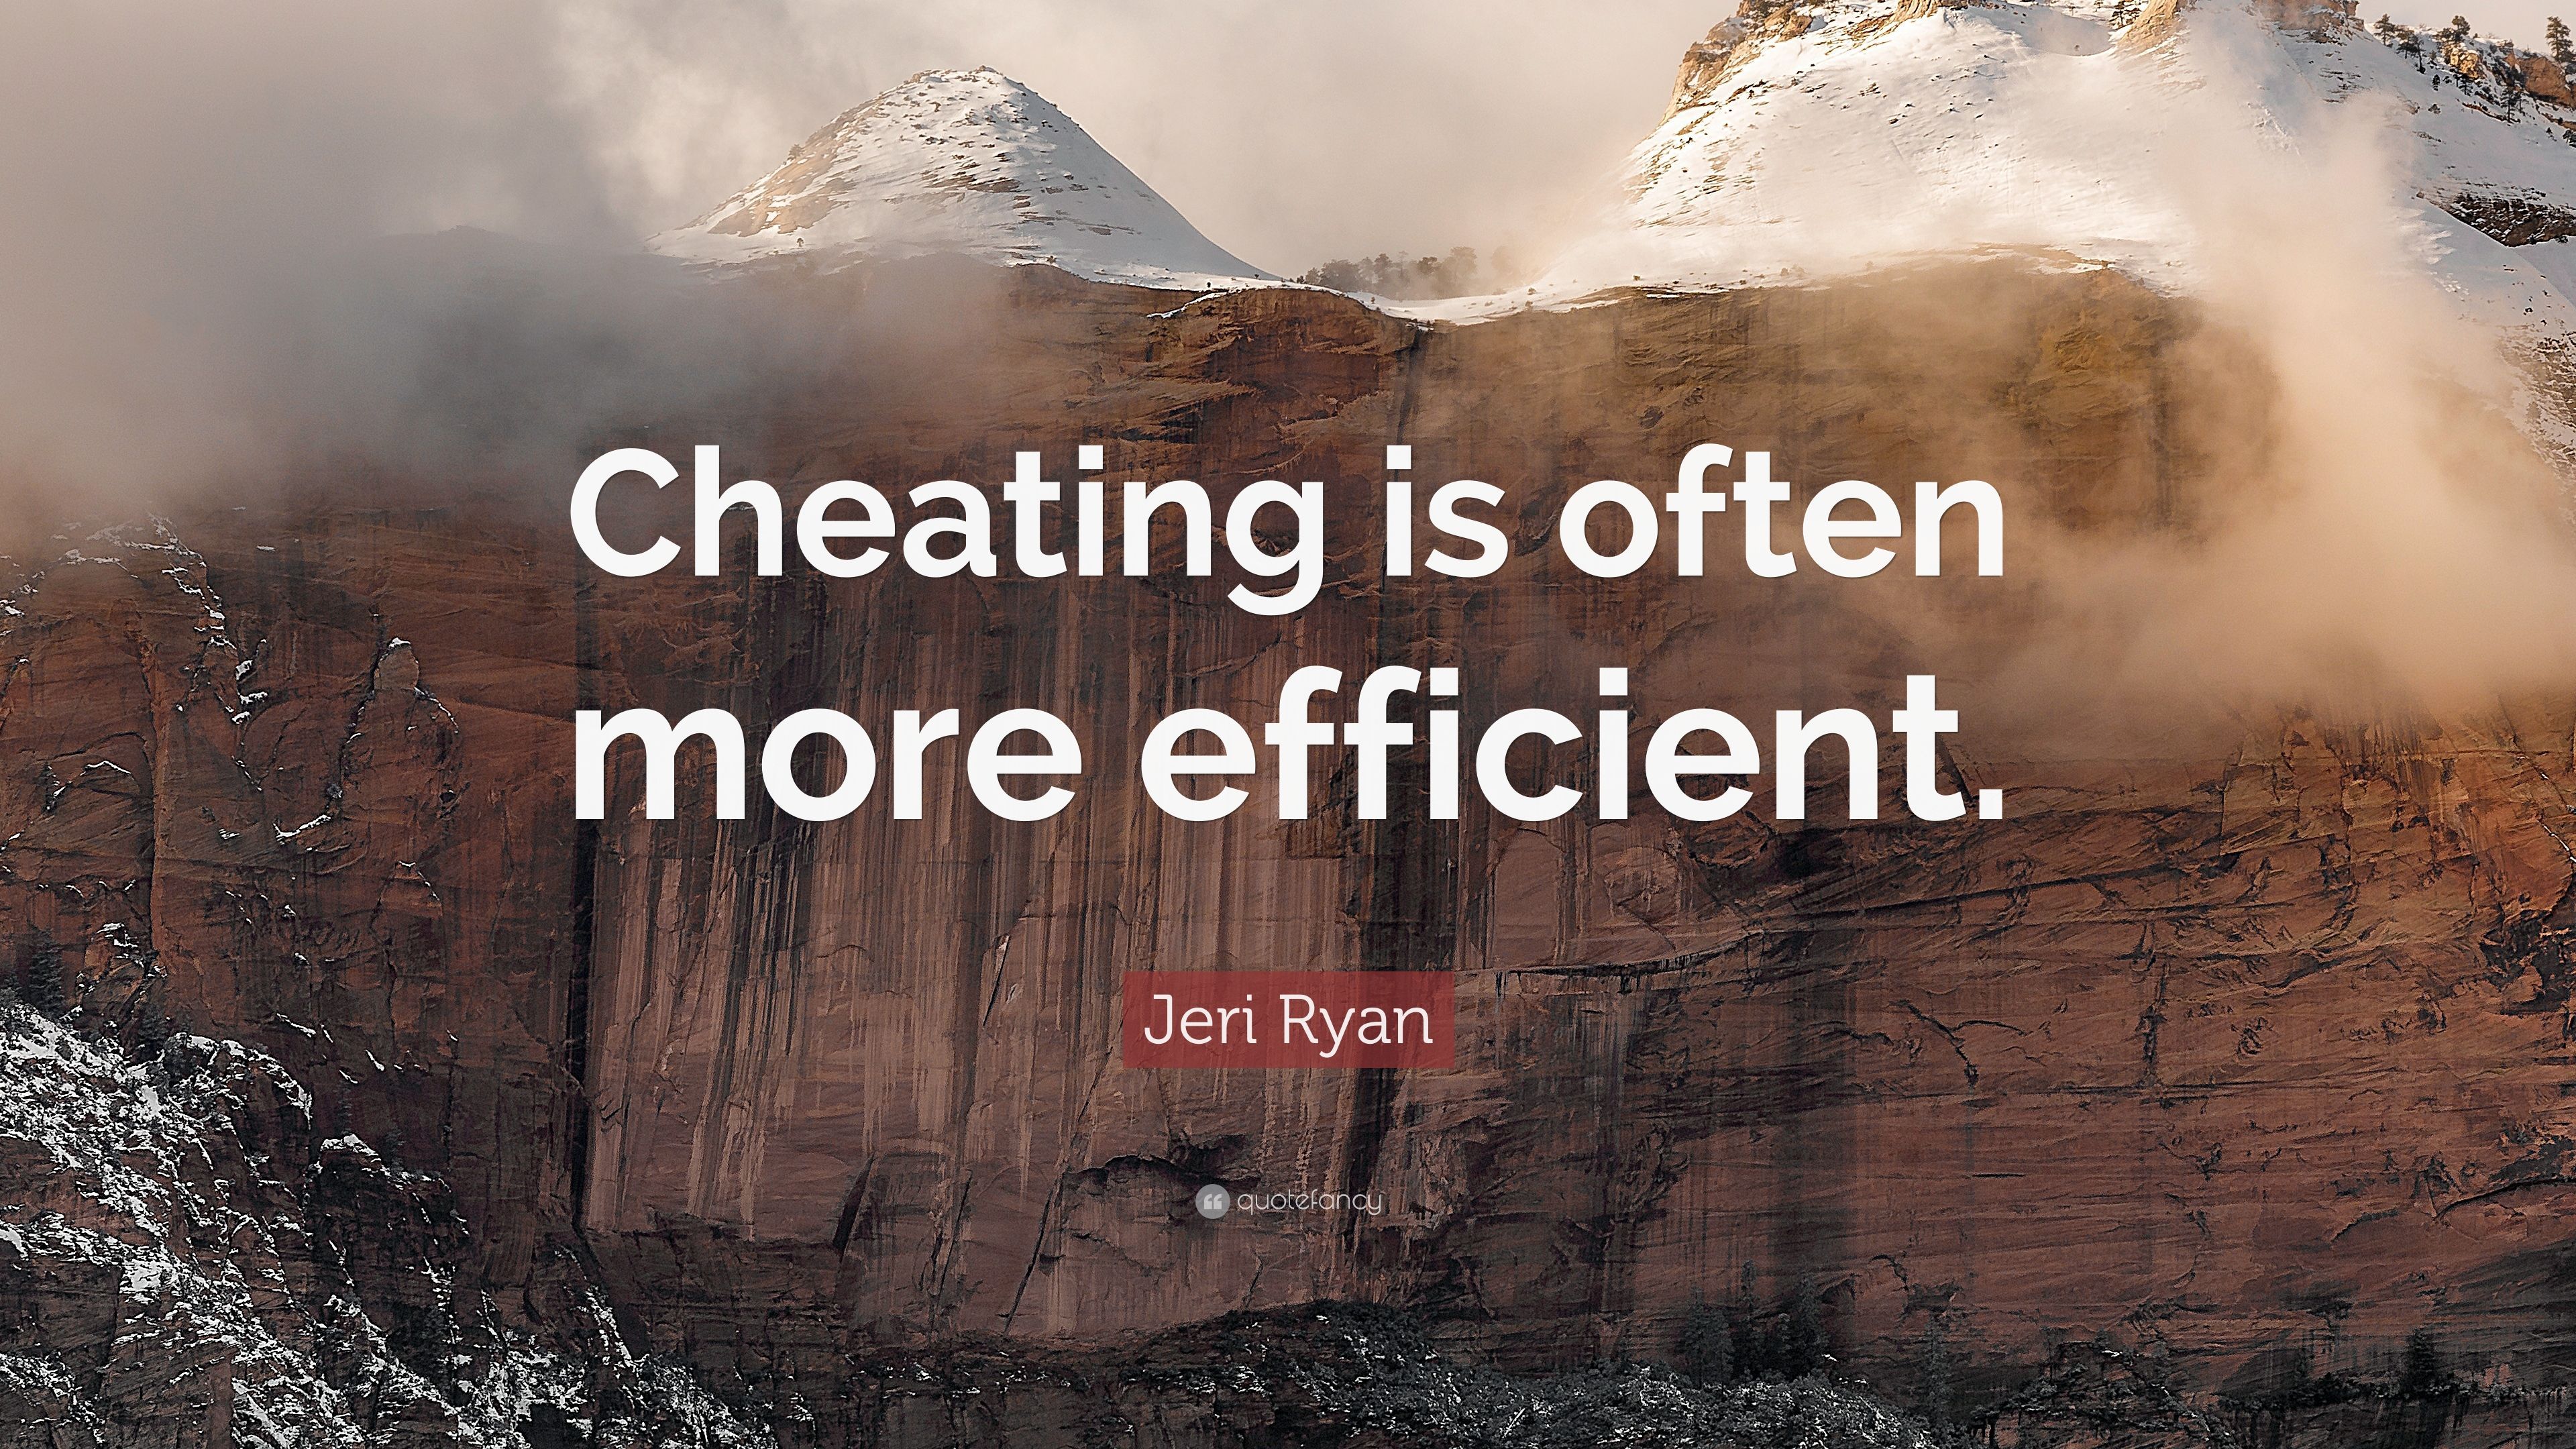 Jeri Ryan Quote: “Cheating is often more efficient.” (7 wallpaper)